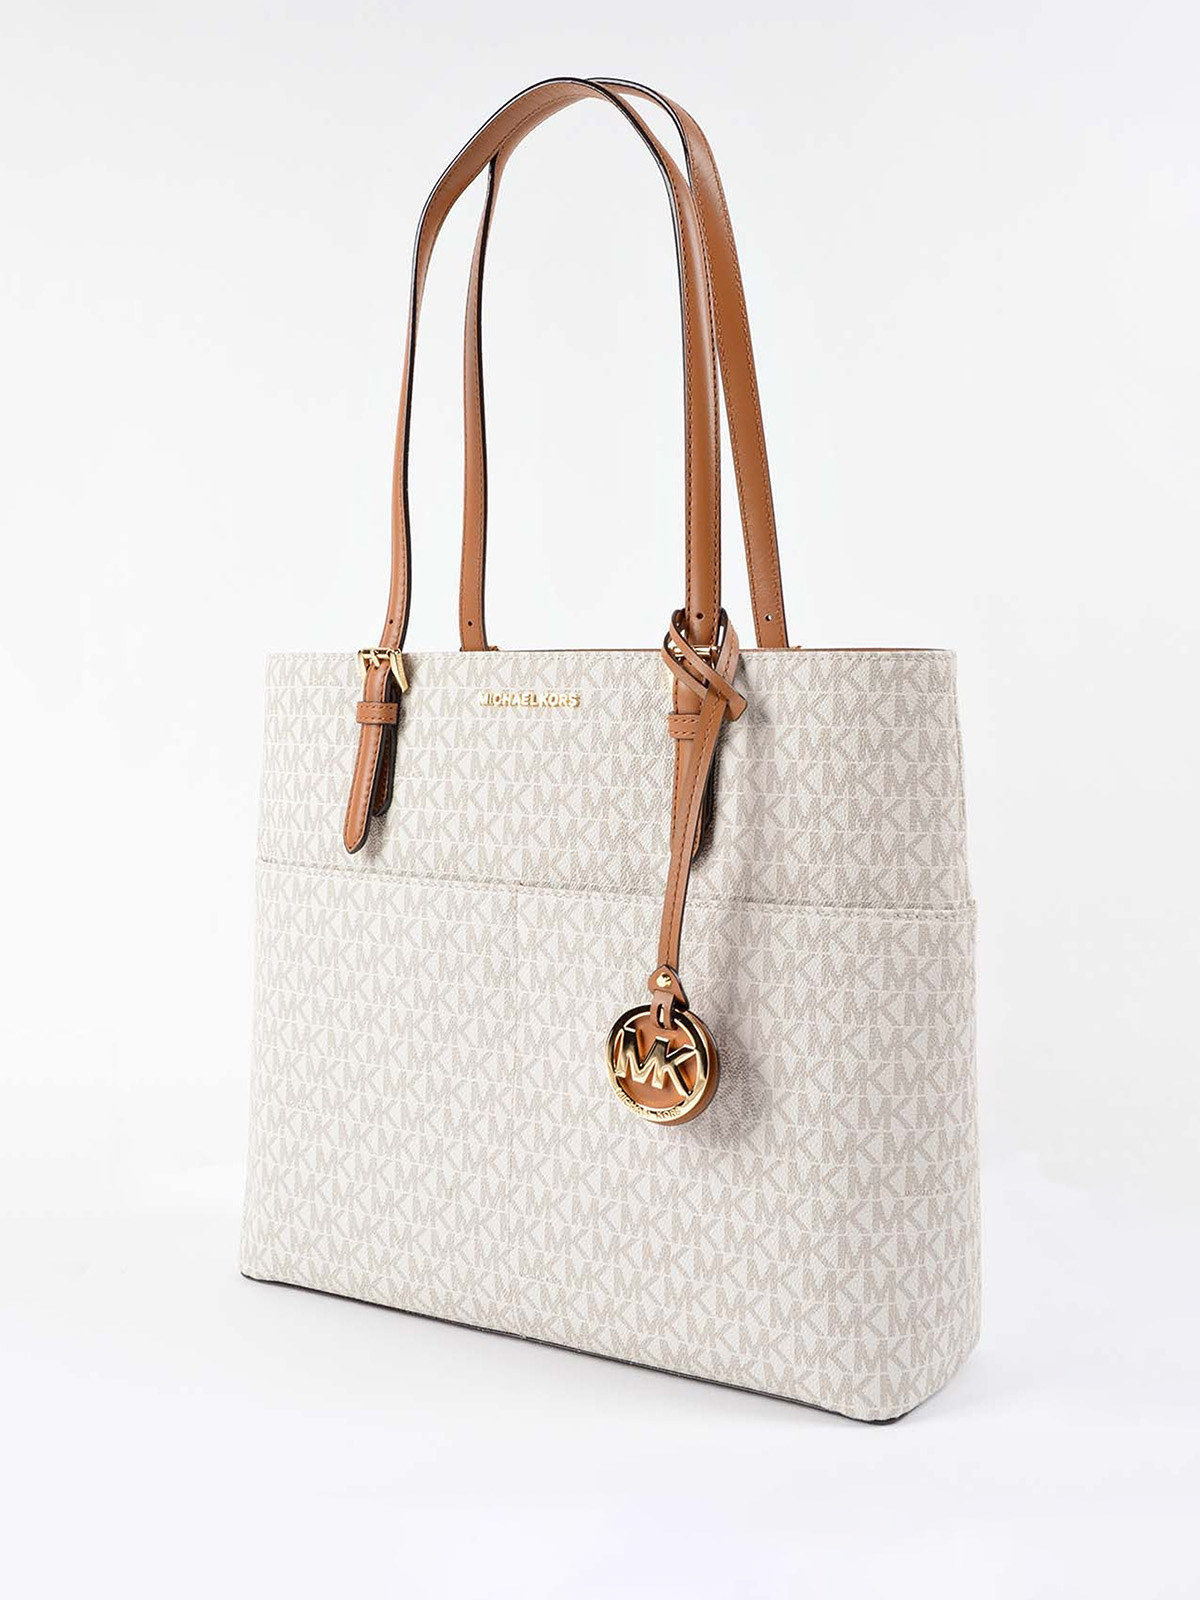 Bedford large tote by Michael Kors - totes bags | Shop online at www.neverfullbag.com - 30S7GBFT3V150